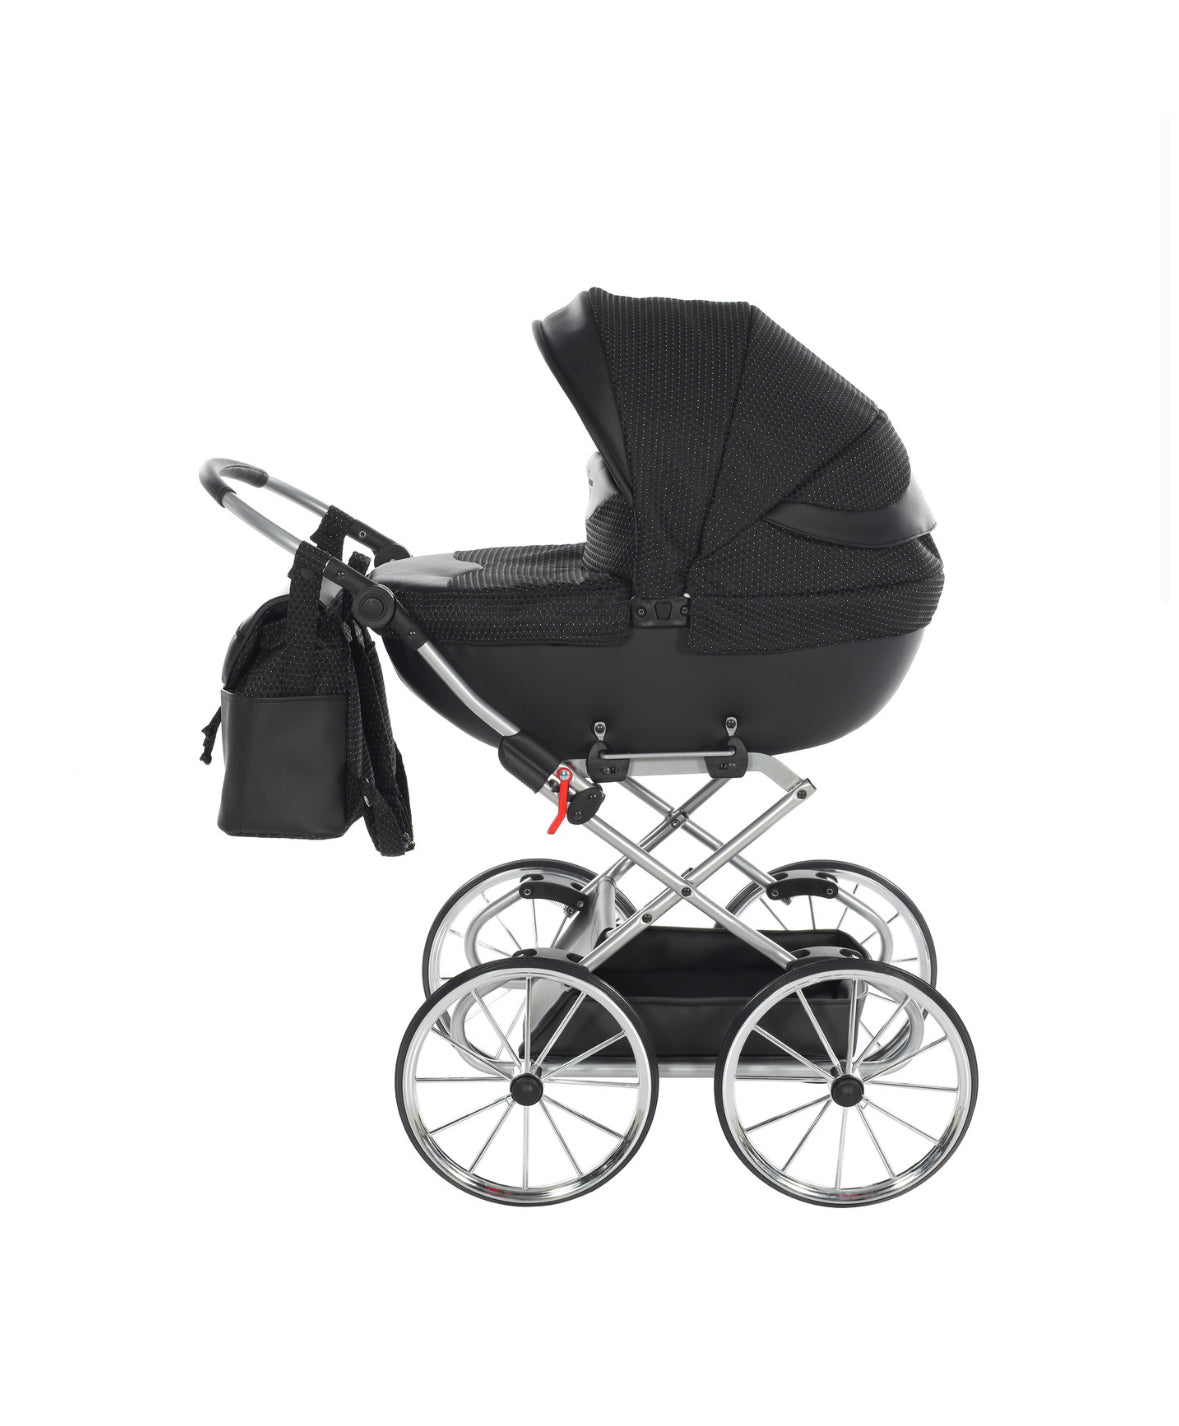 BLACK & SILVER DOLCE DOLL'S PRAM - Up to 21 days delivery!